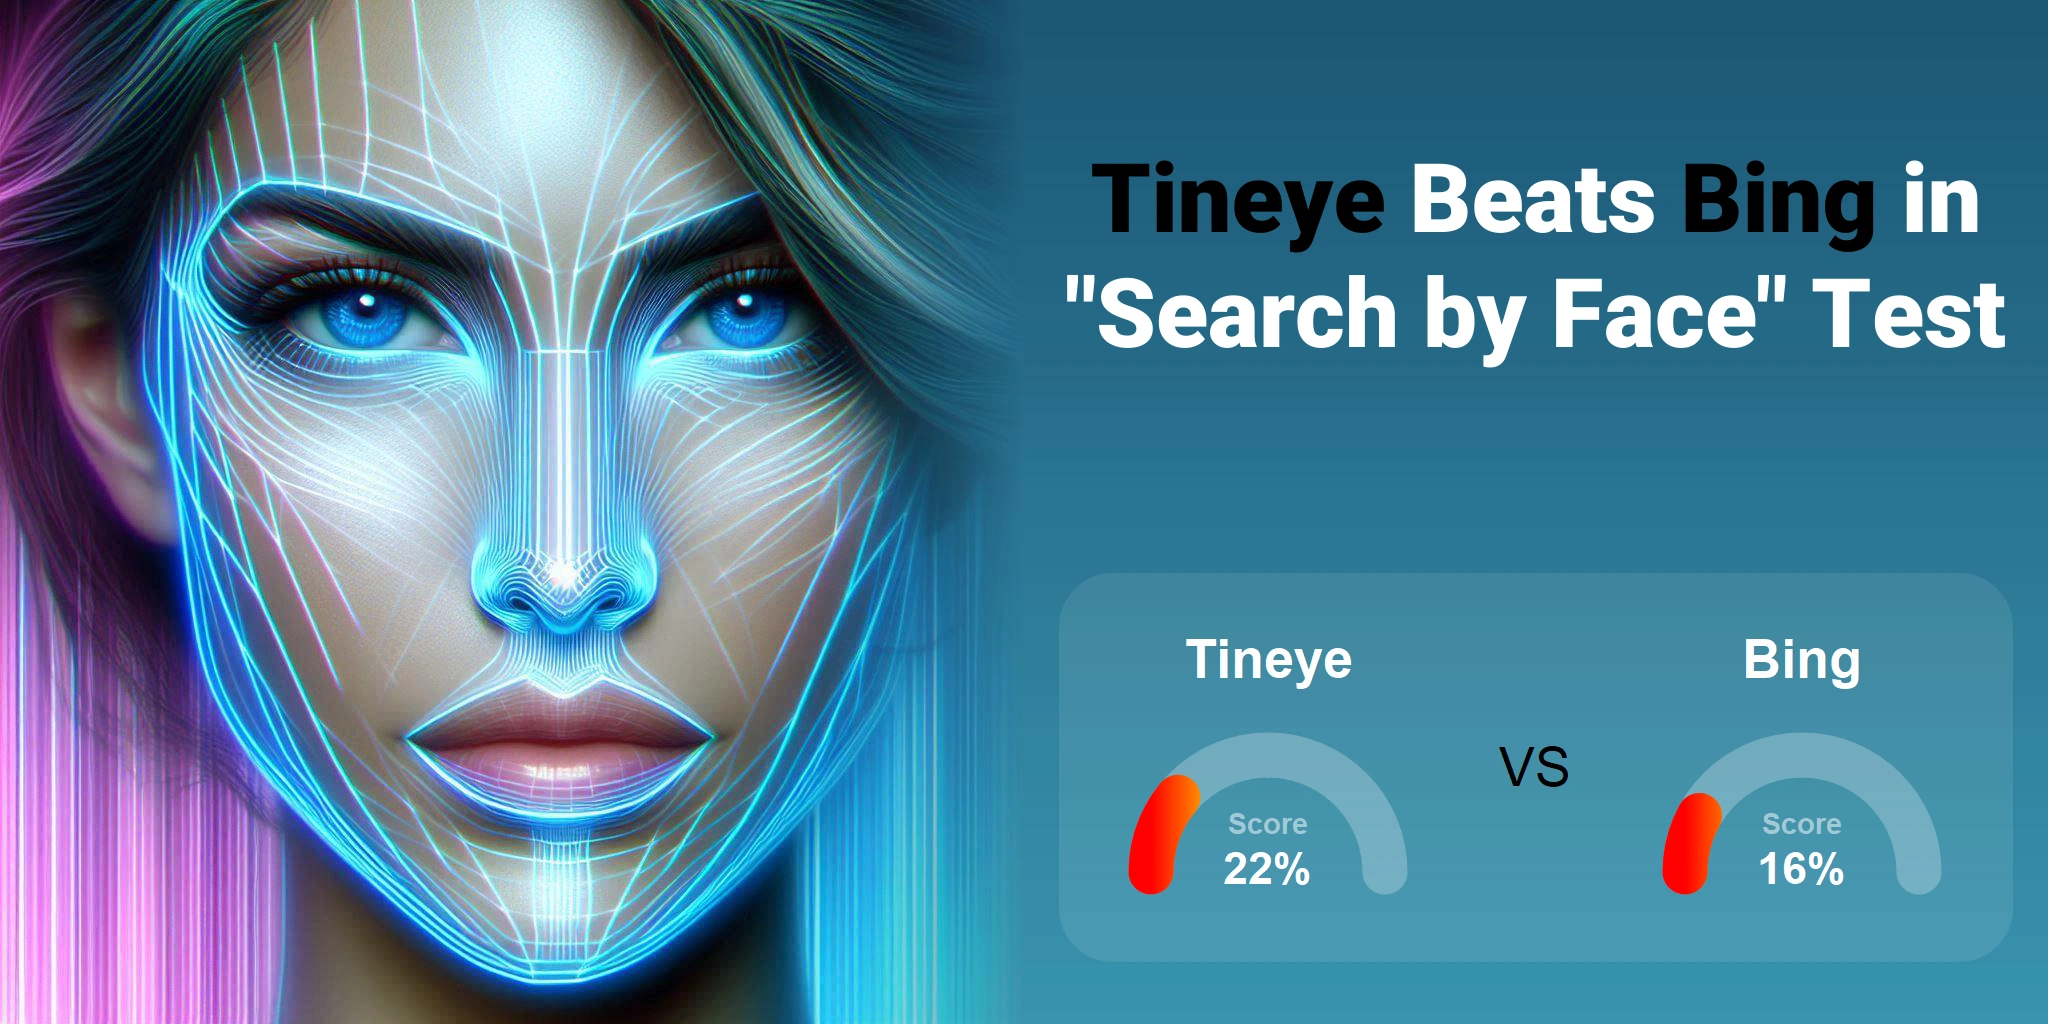 Which is Better for Face Search: <br>Tineye or Bing?